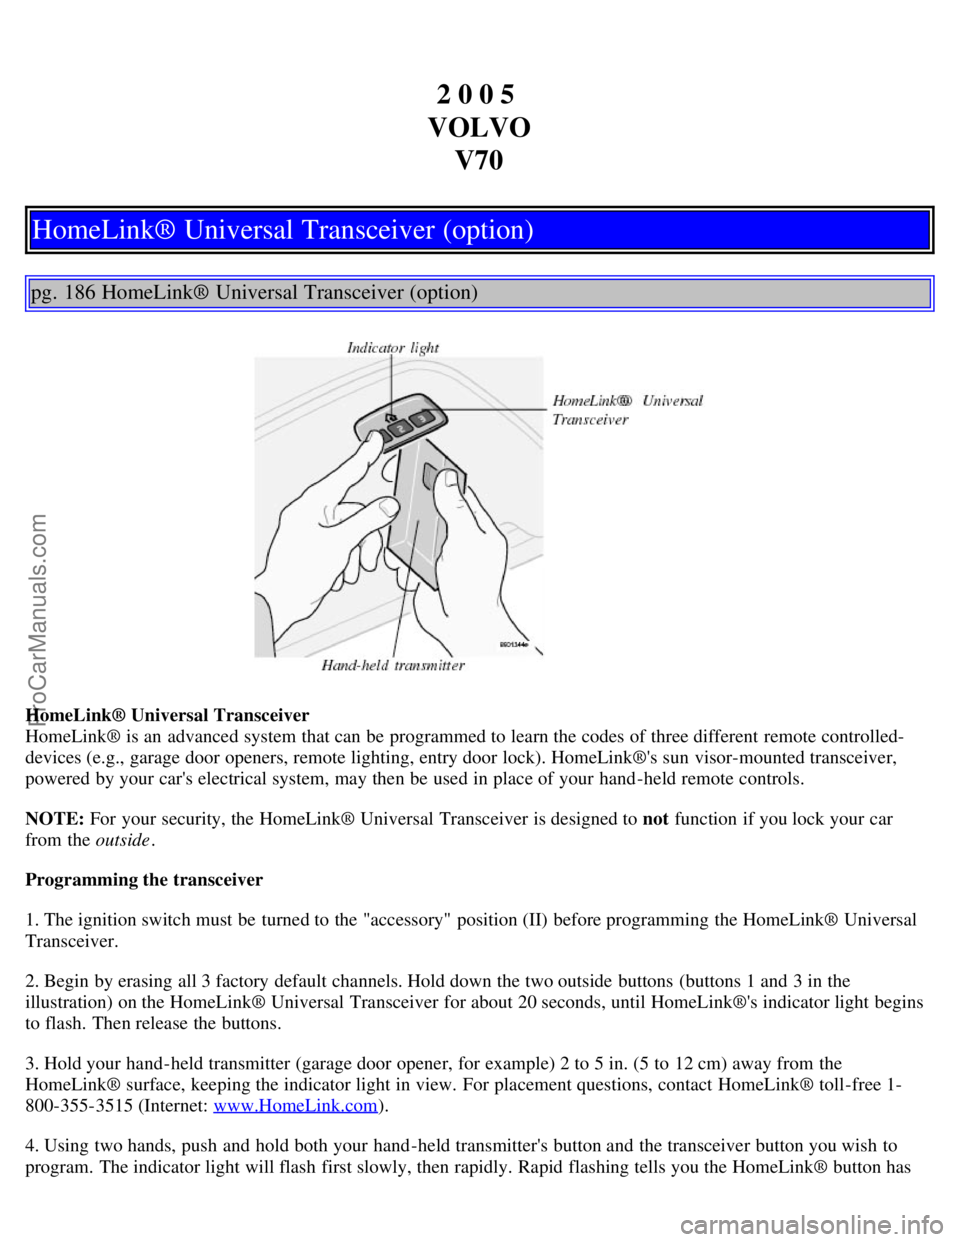 VOLVO V70 2005  Owners Manual 2 0 0 5 
VOLVO V70
HomeLink® Universal Transceiver (option)
pg. 186 HomeLink® Universal Transceiver (option)
HomeLink® Universal Transceiver
HomeLink® is an  advanced system that can be  programme